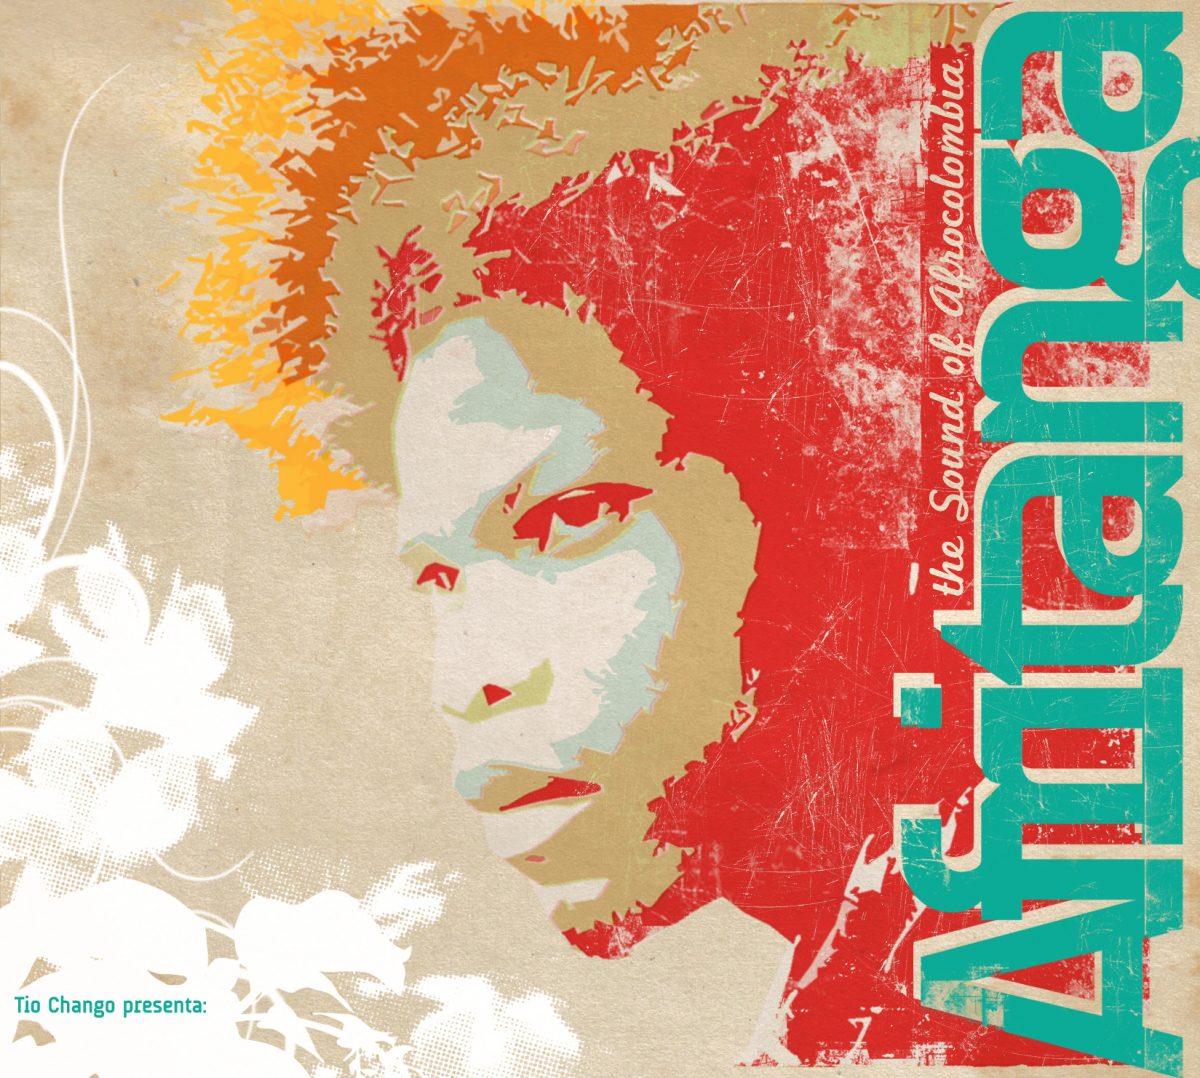 Afritanga - The Sound of Afrocolombia